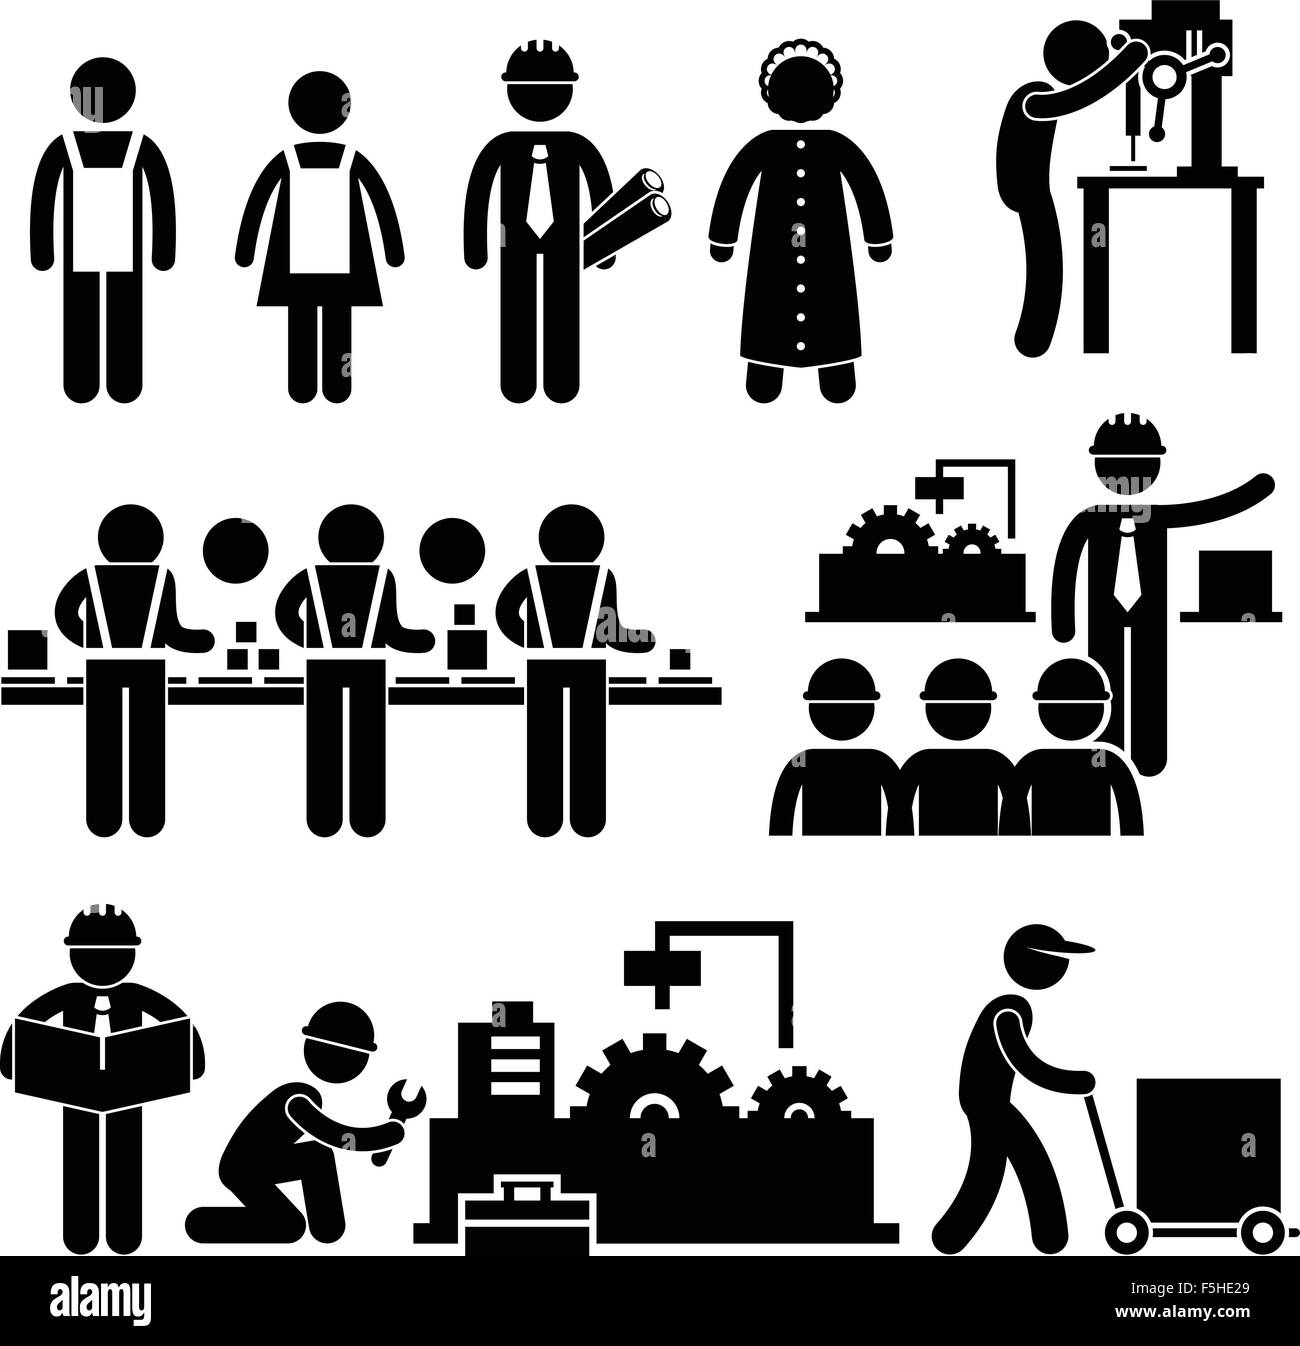 Factory Worker Engineer Manager Supervisor Working Stick Figure Pictogram Icon Stock Vector